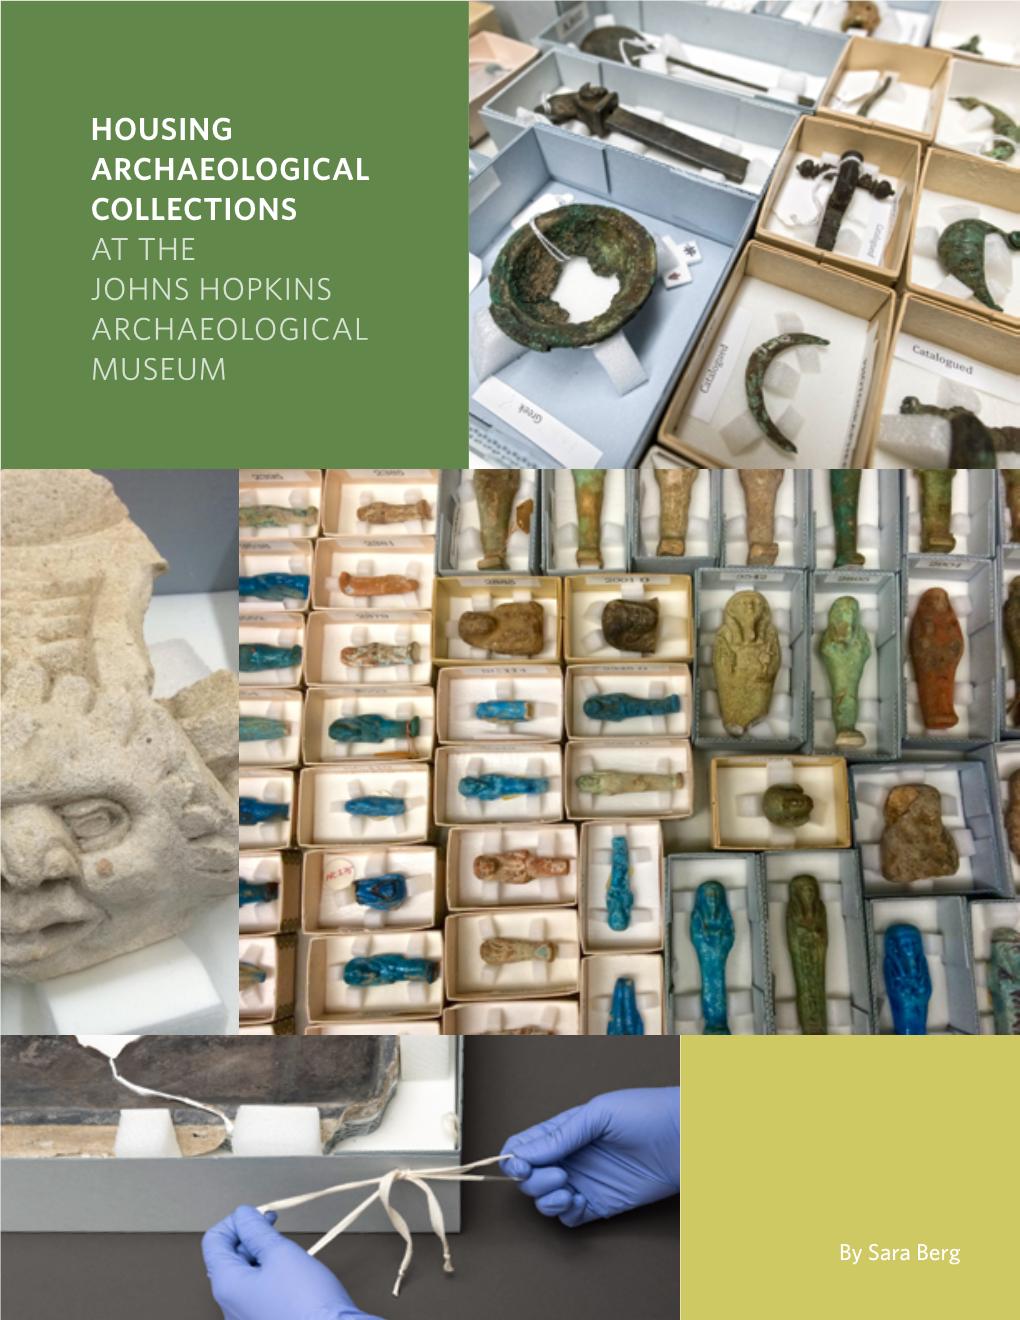 Housing Archaeological Collections at the Johns Hopkins Archaeological Museum